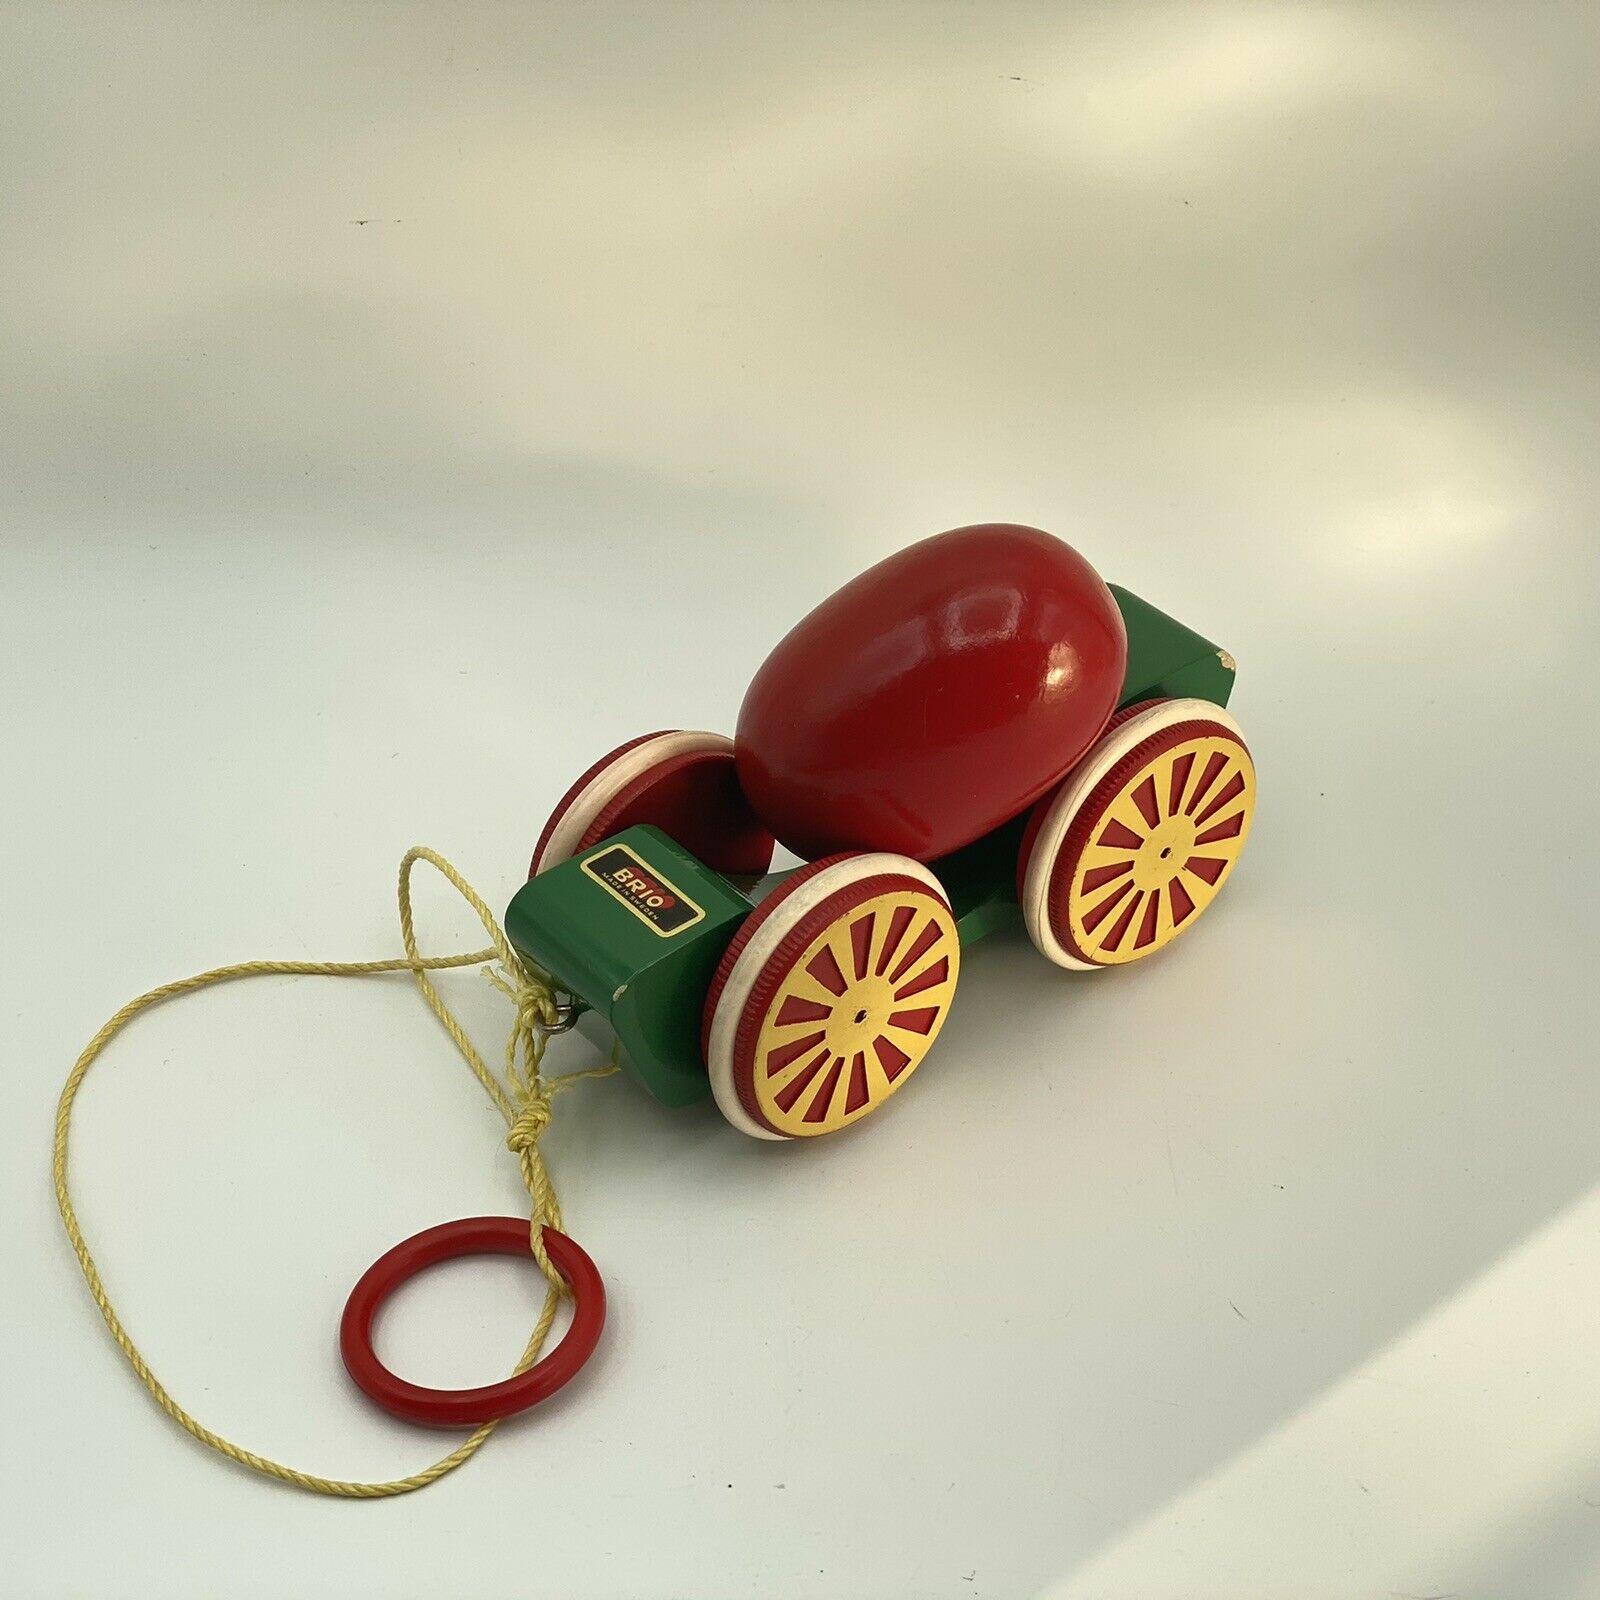 Vintage Brio Egg Cart Wood Pull Toy Made In Sweden 30362